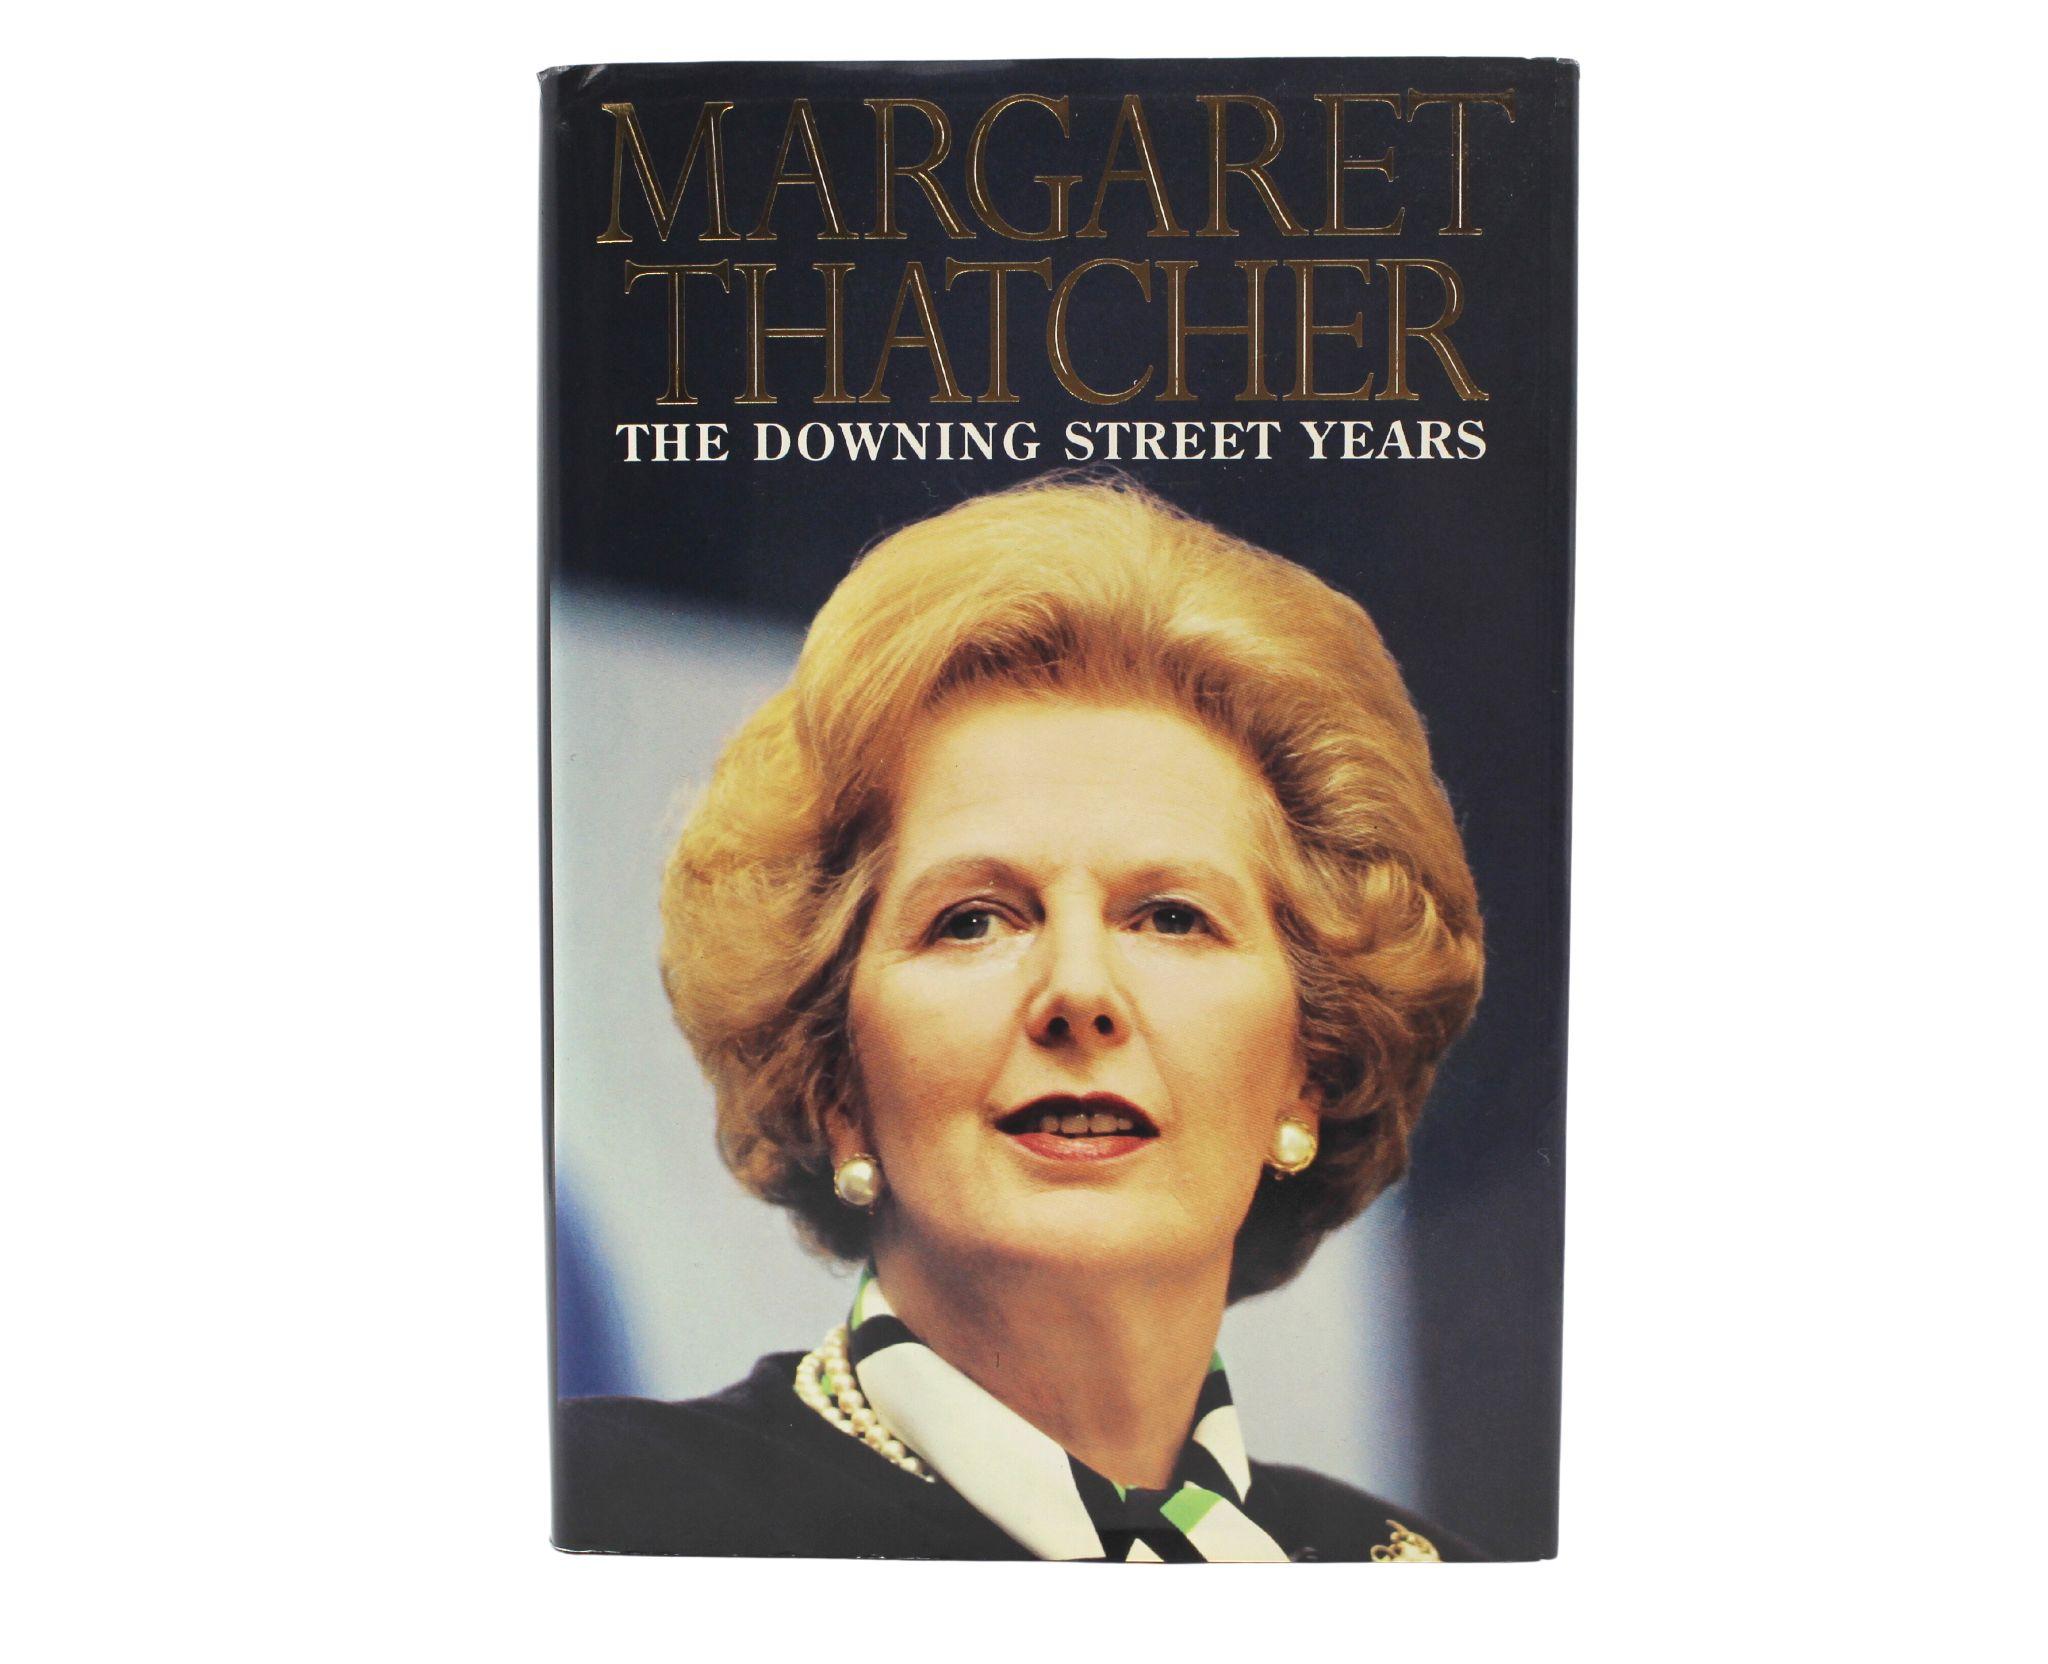 Thatcher, margaret. The Downing Street Years, New York: Harper/Collins, 1993. First Edition. Signed by Margaret Thatcher in blue pen on the publisher’s sticker, on free front endpaper. Octavo. Presented in original boards and dust jacket.